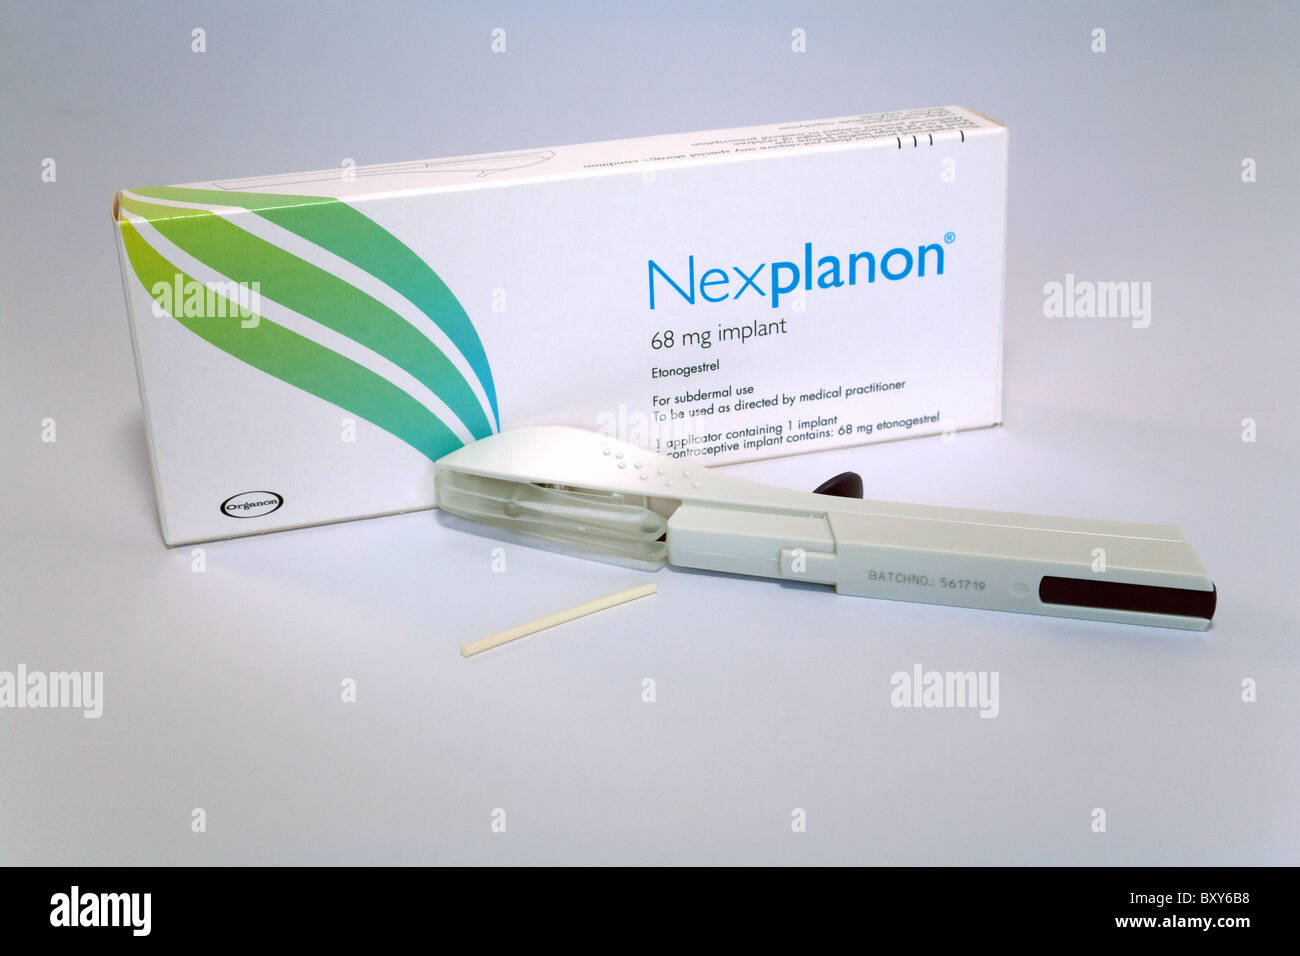 The Nexplanon female long term contraceptive implant for long acting reversible contraception Stock Photo